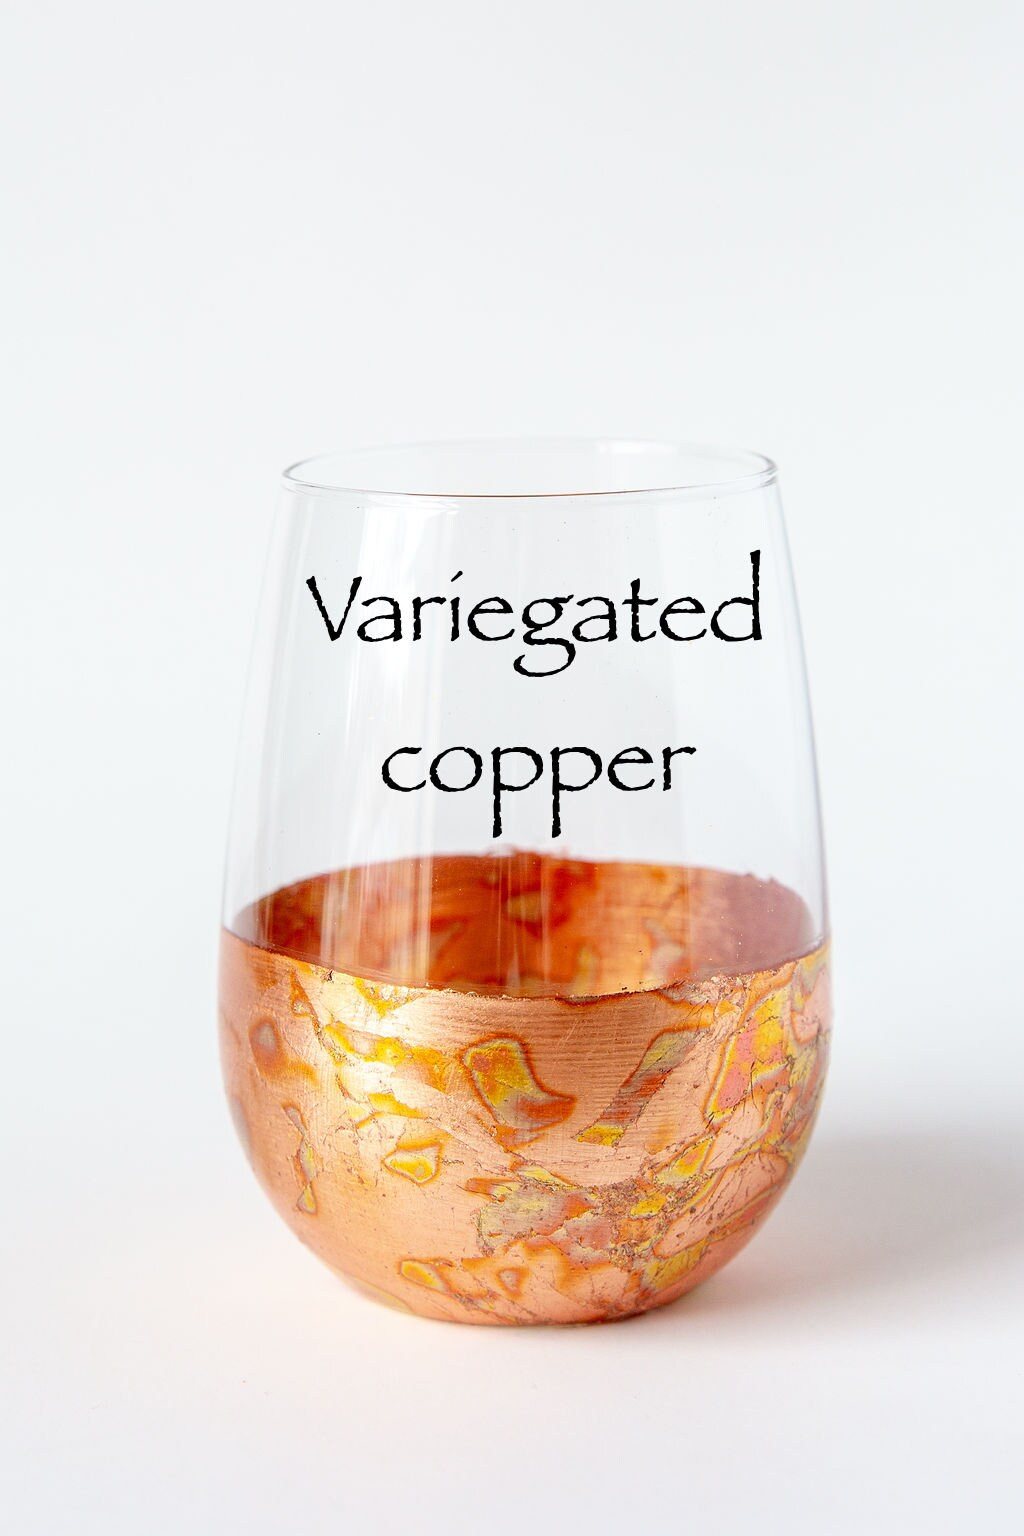 Stunning variegated copper leaf for Decor and Souvenirs 